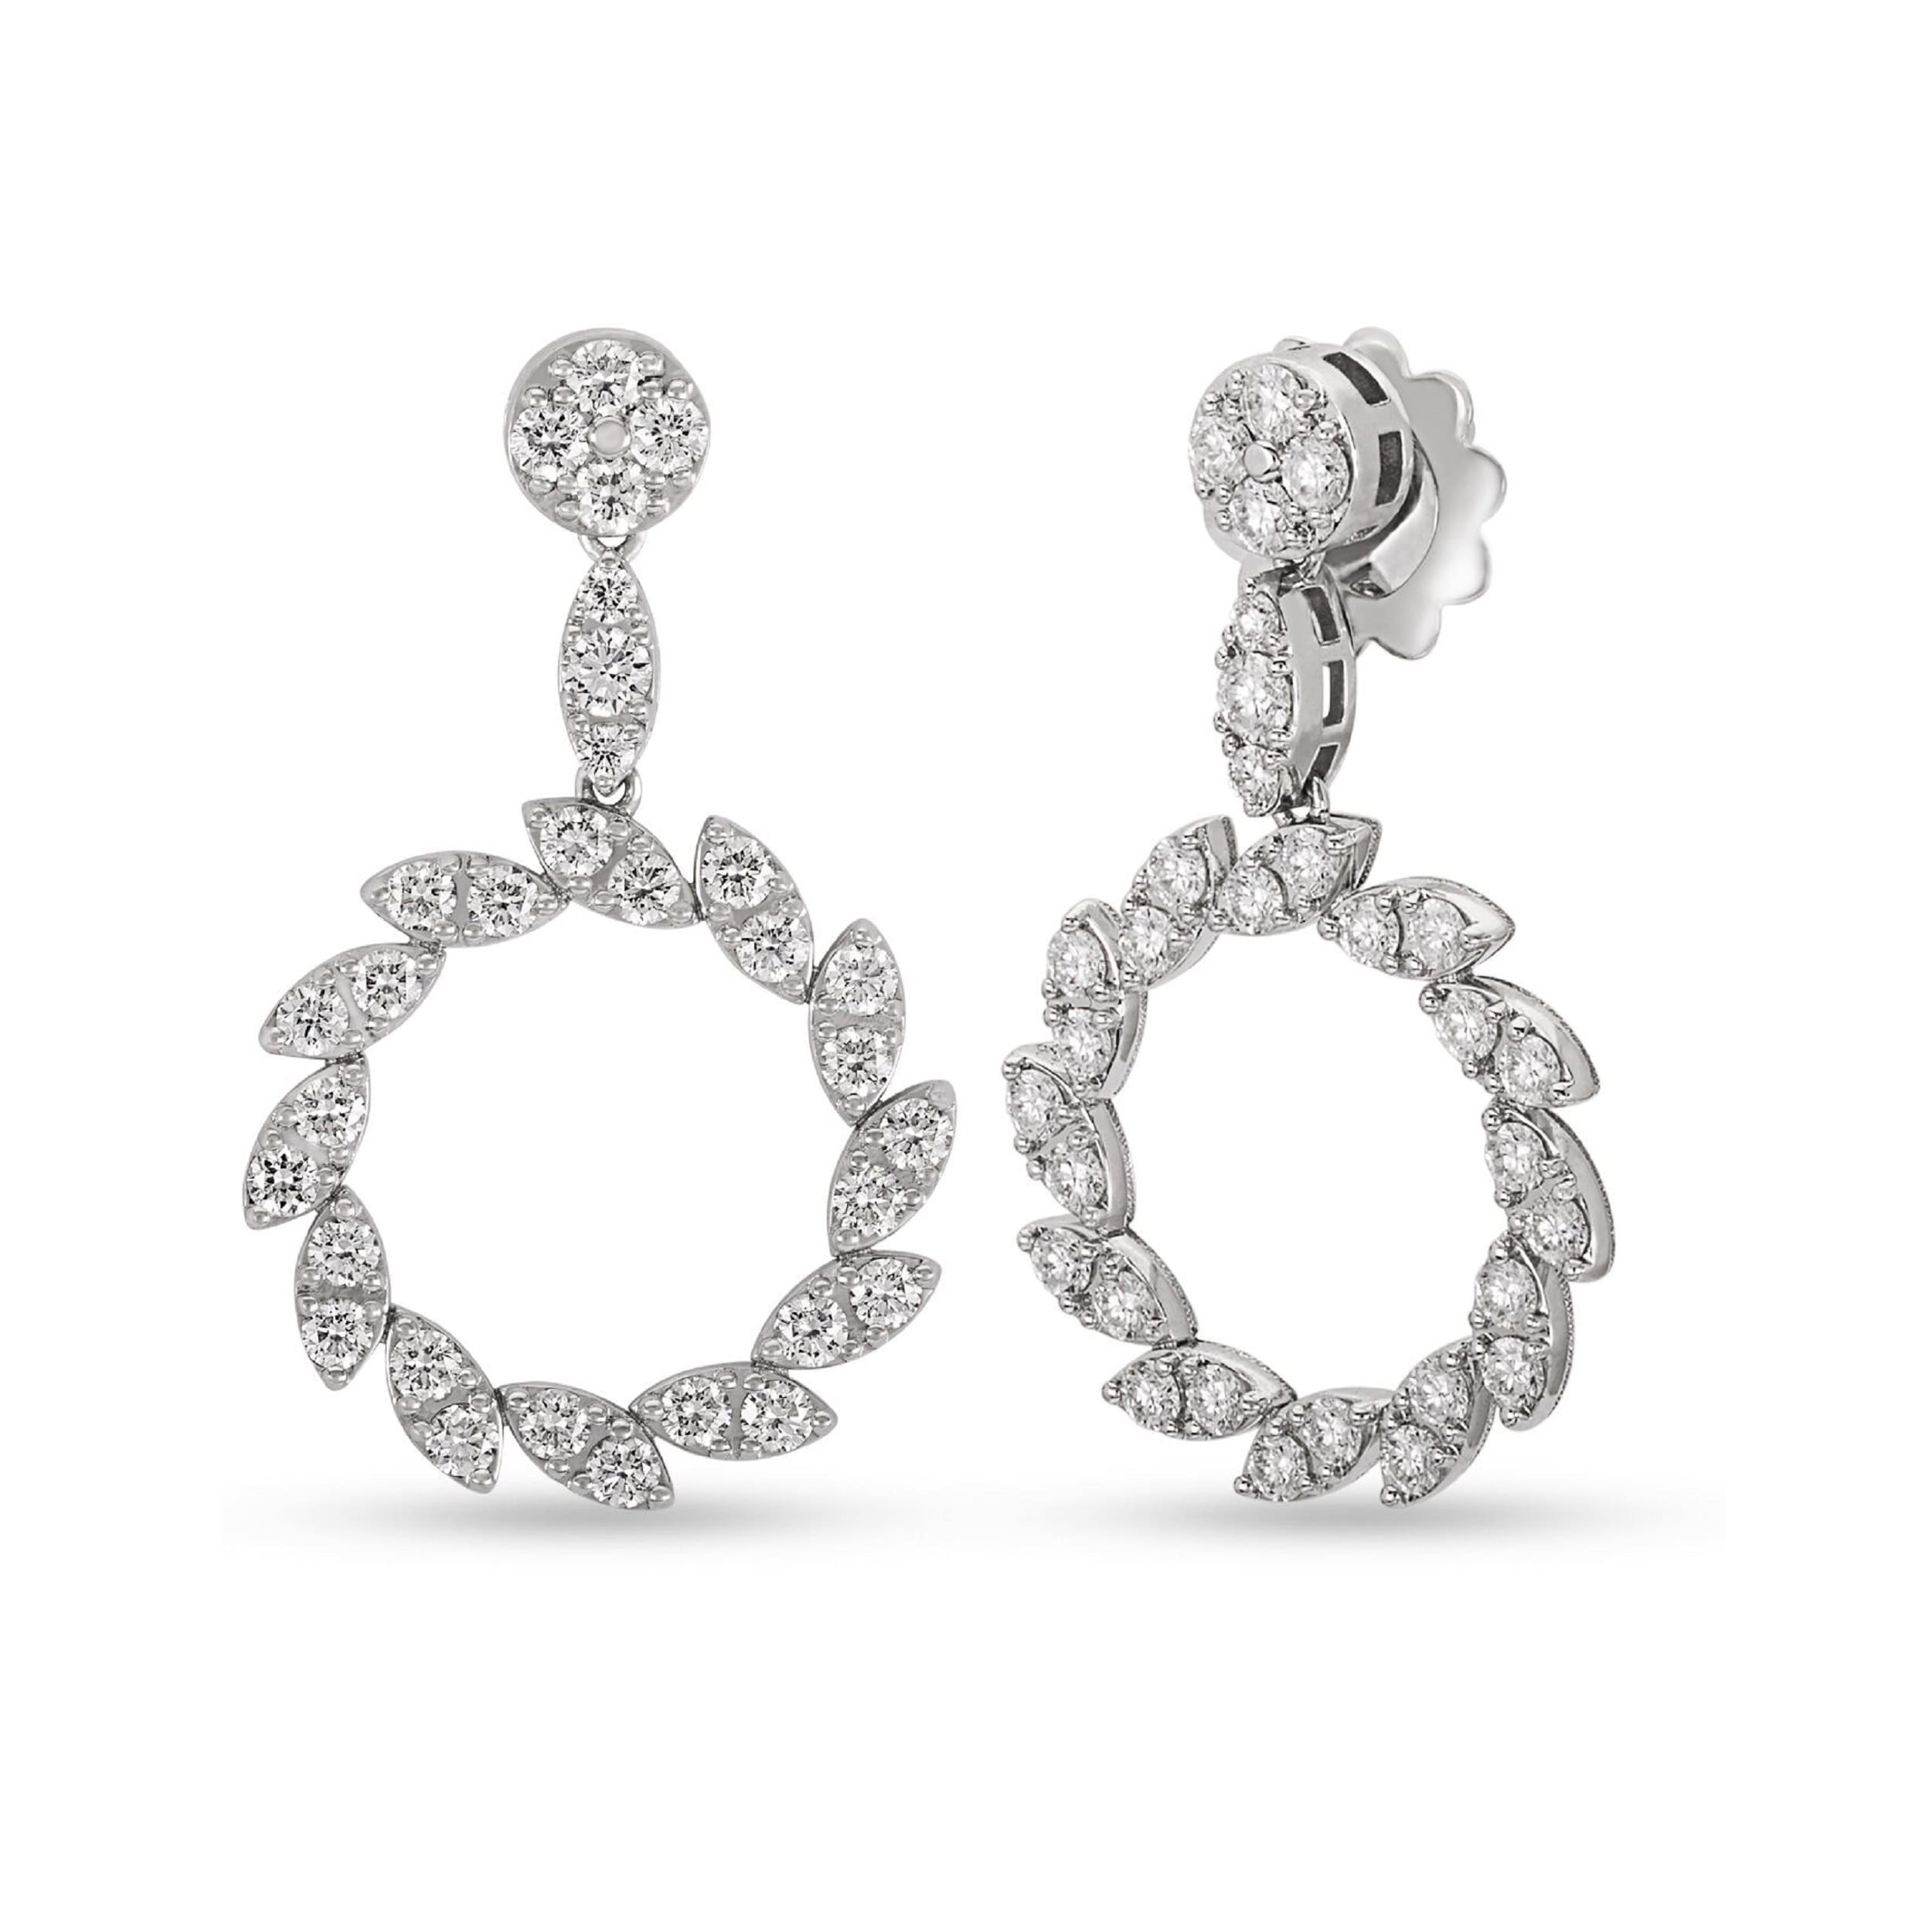 The Marquesa Collection 18k White Gold 2.04cttw Diamond Small Swirl Earrings